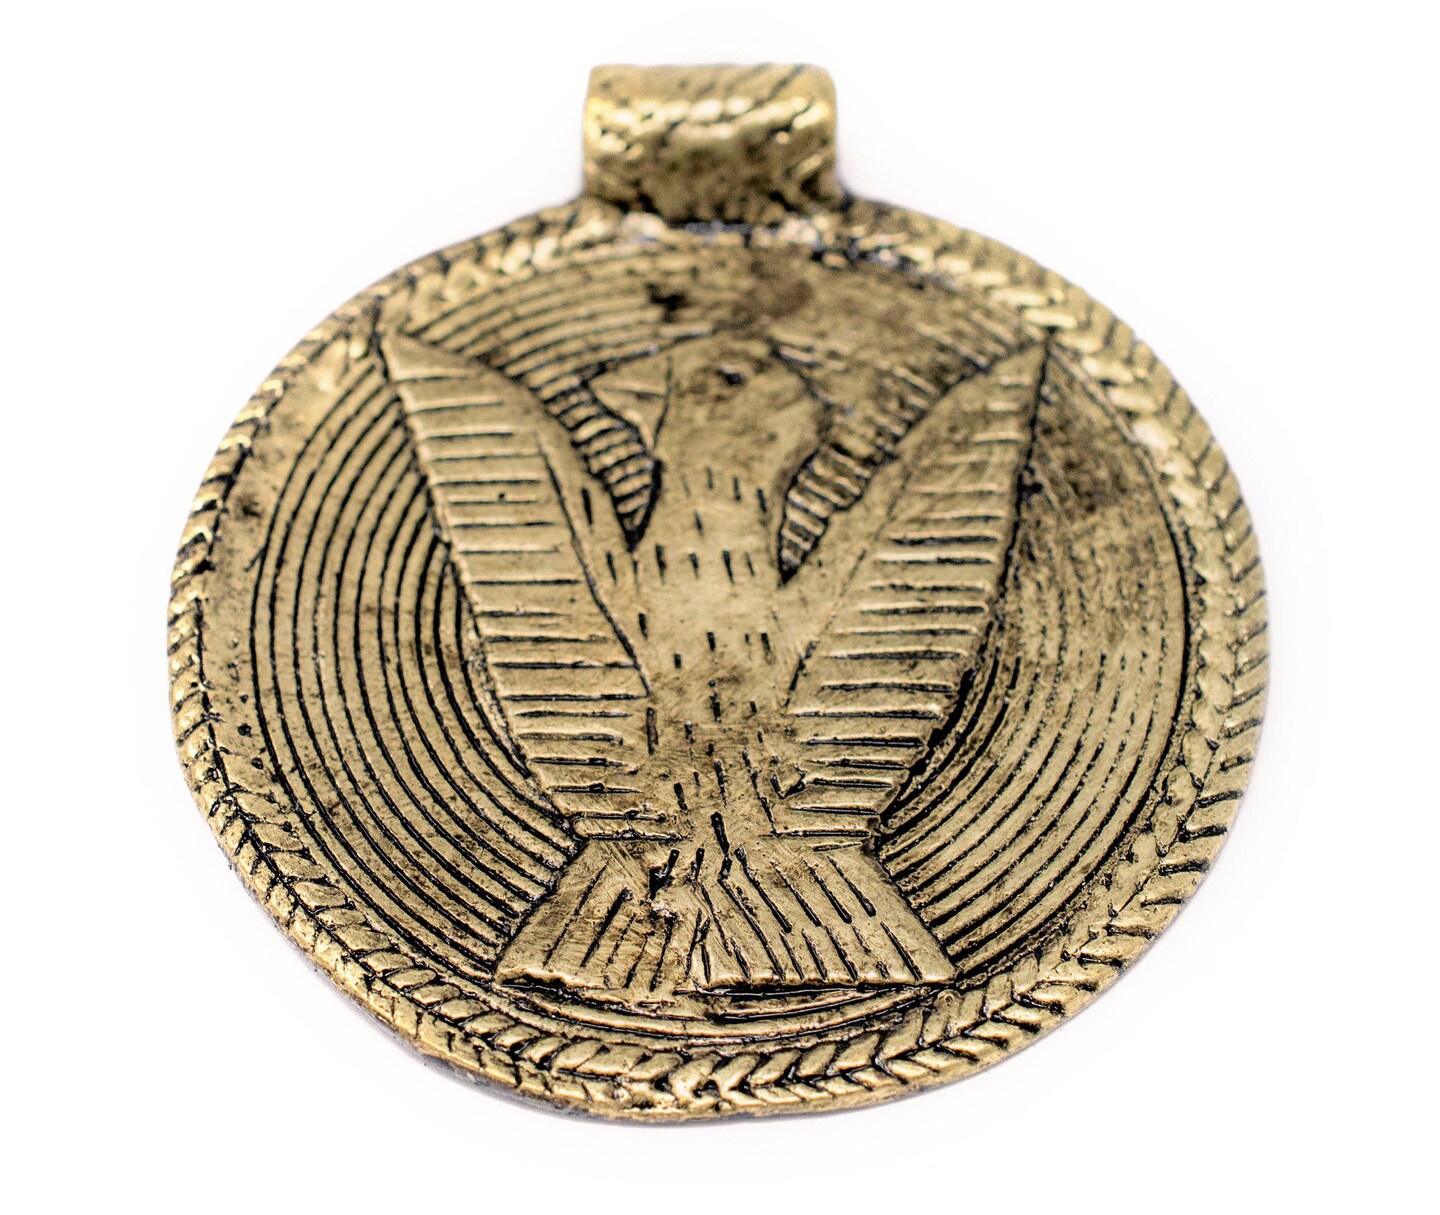 TheBeadChest Brass Bird Baule Bead Pendant (58x52mm): African Tribal Metal Pendant for DIY Jewelry and Necklace